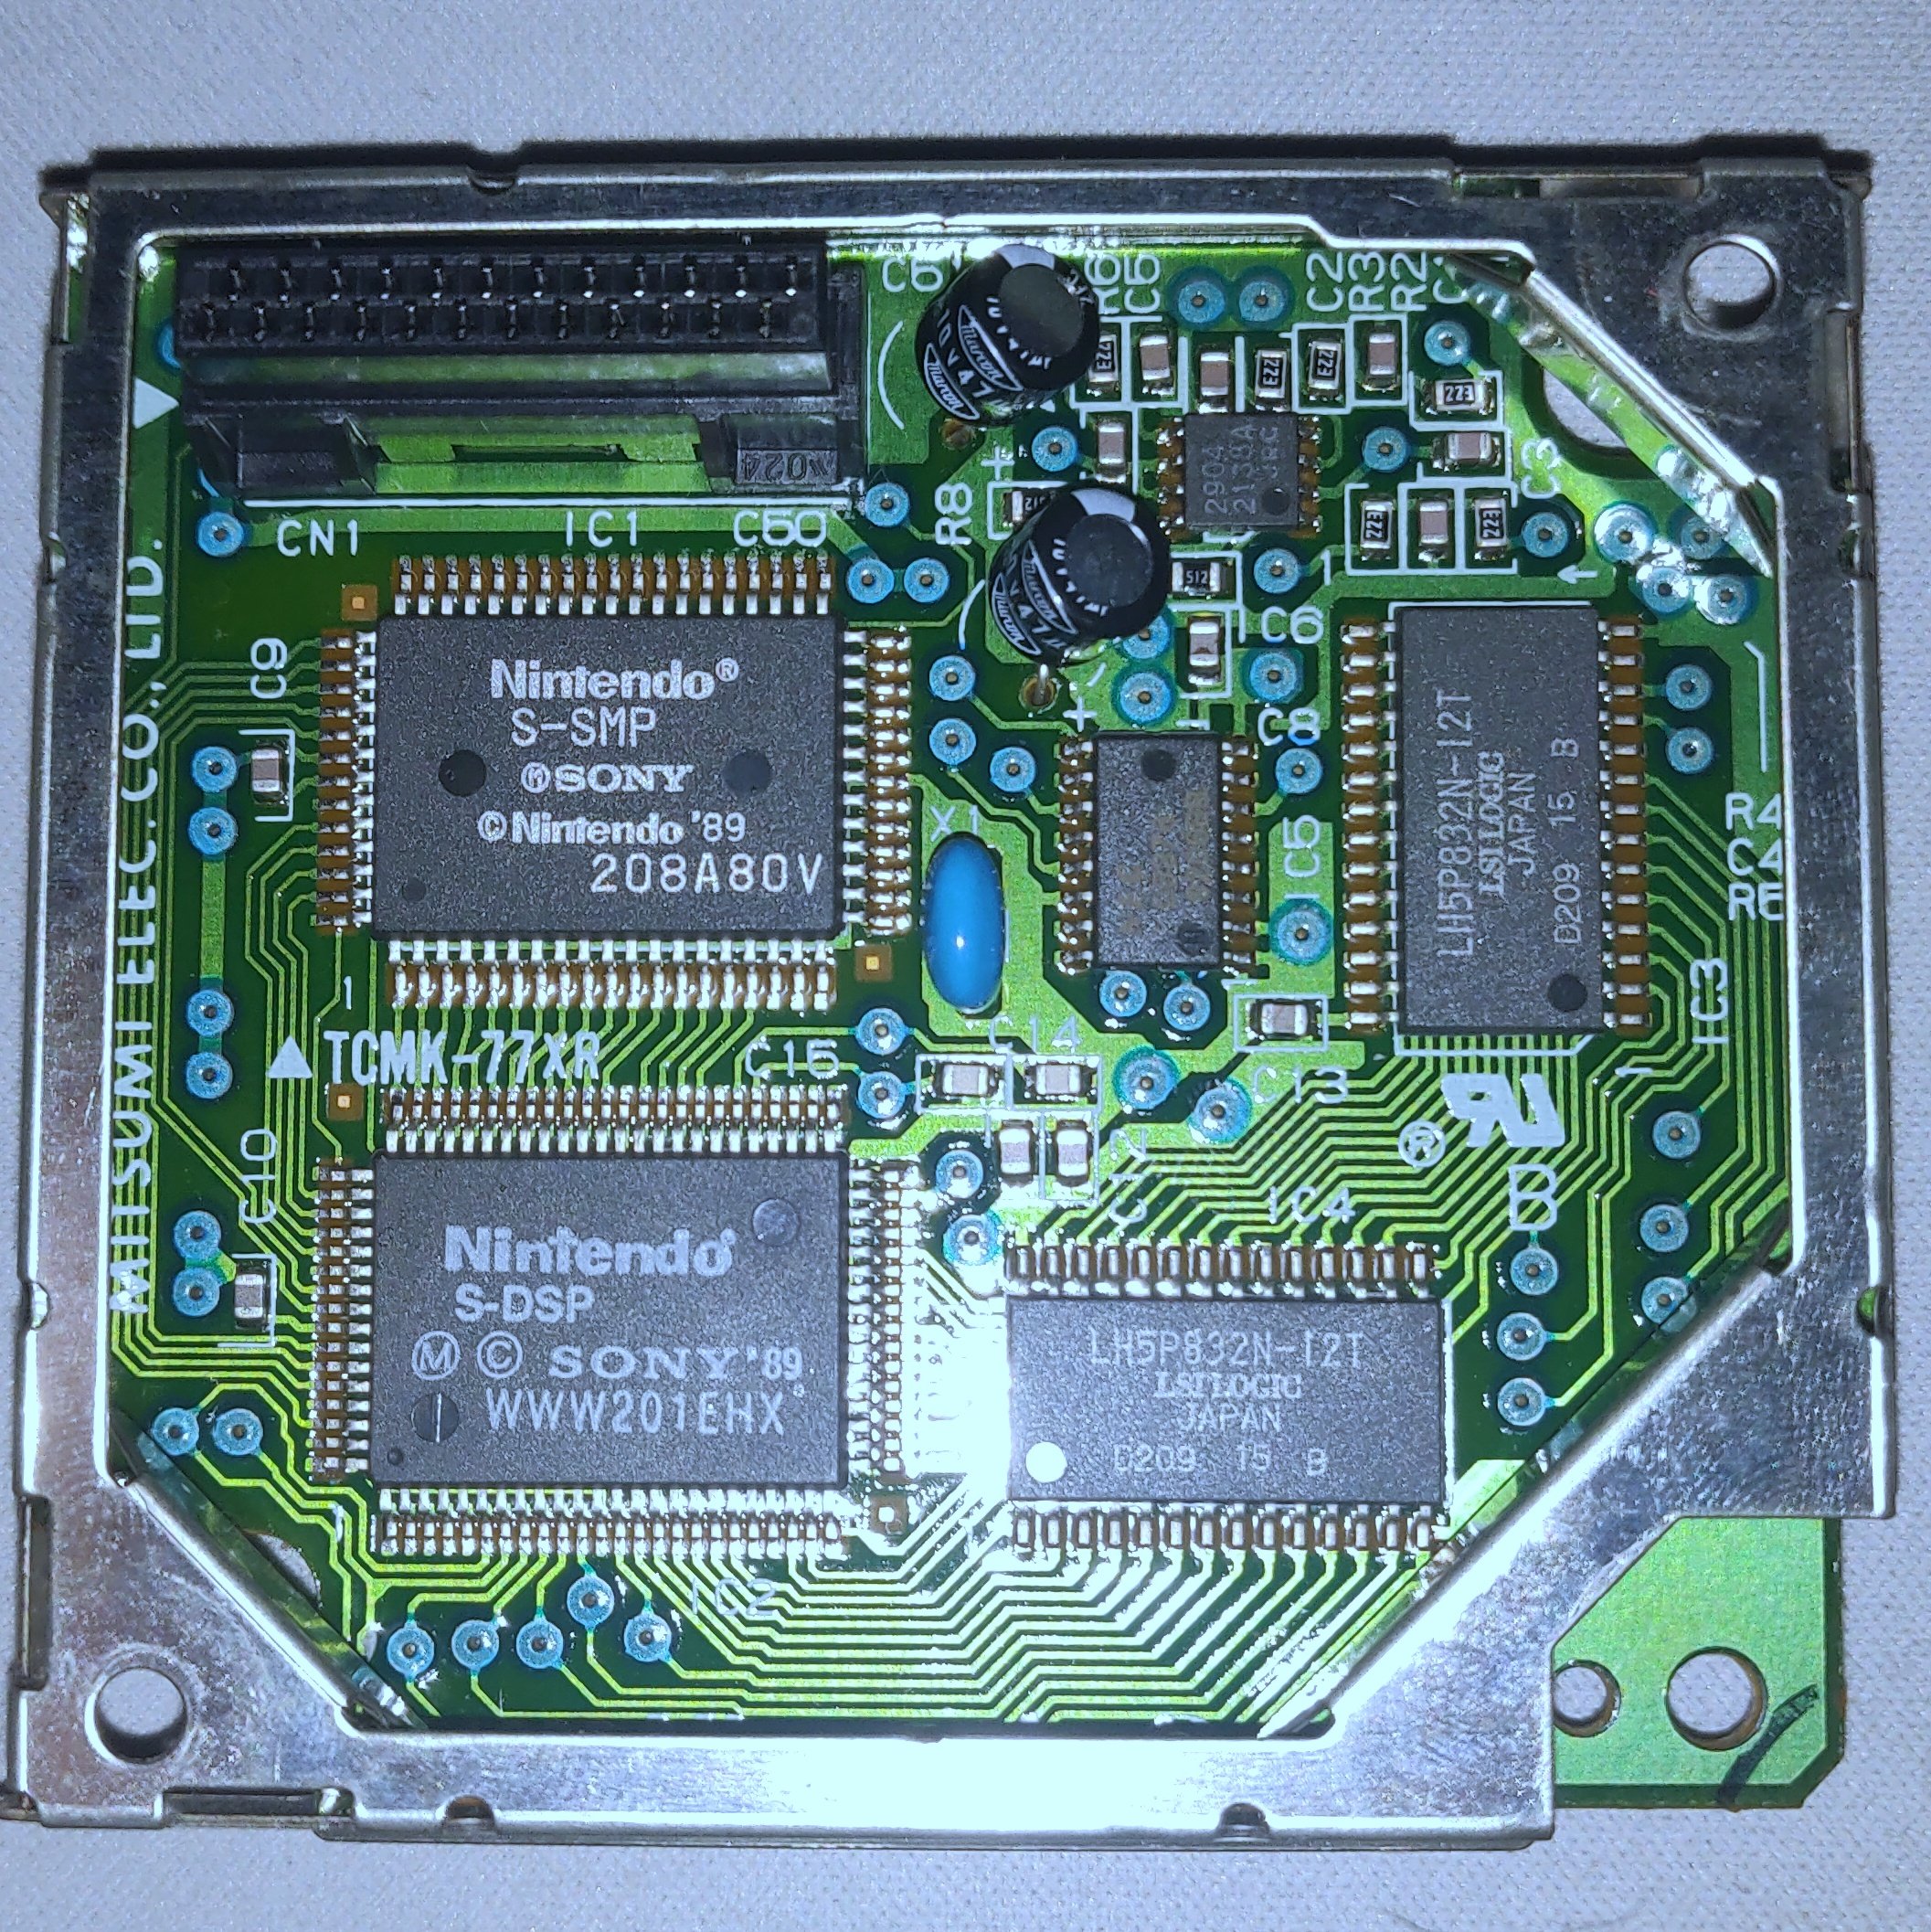 A picture of the SNES APU module. This module appeared on early hardware revisions of the SNES and used a small connector to attach to the main motherboard. Visible are the S-SMP chip, which is a simple 6502-like CPU, and the S-DSP chip, which contains custom silicon for sound generation. Alongside those two are 2 RAM modules and an op-amp for audio output buffering.